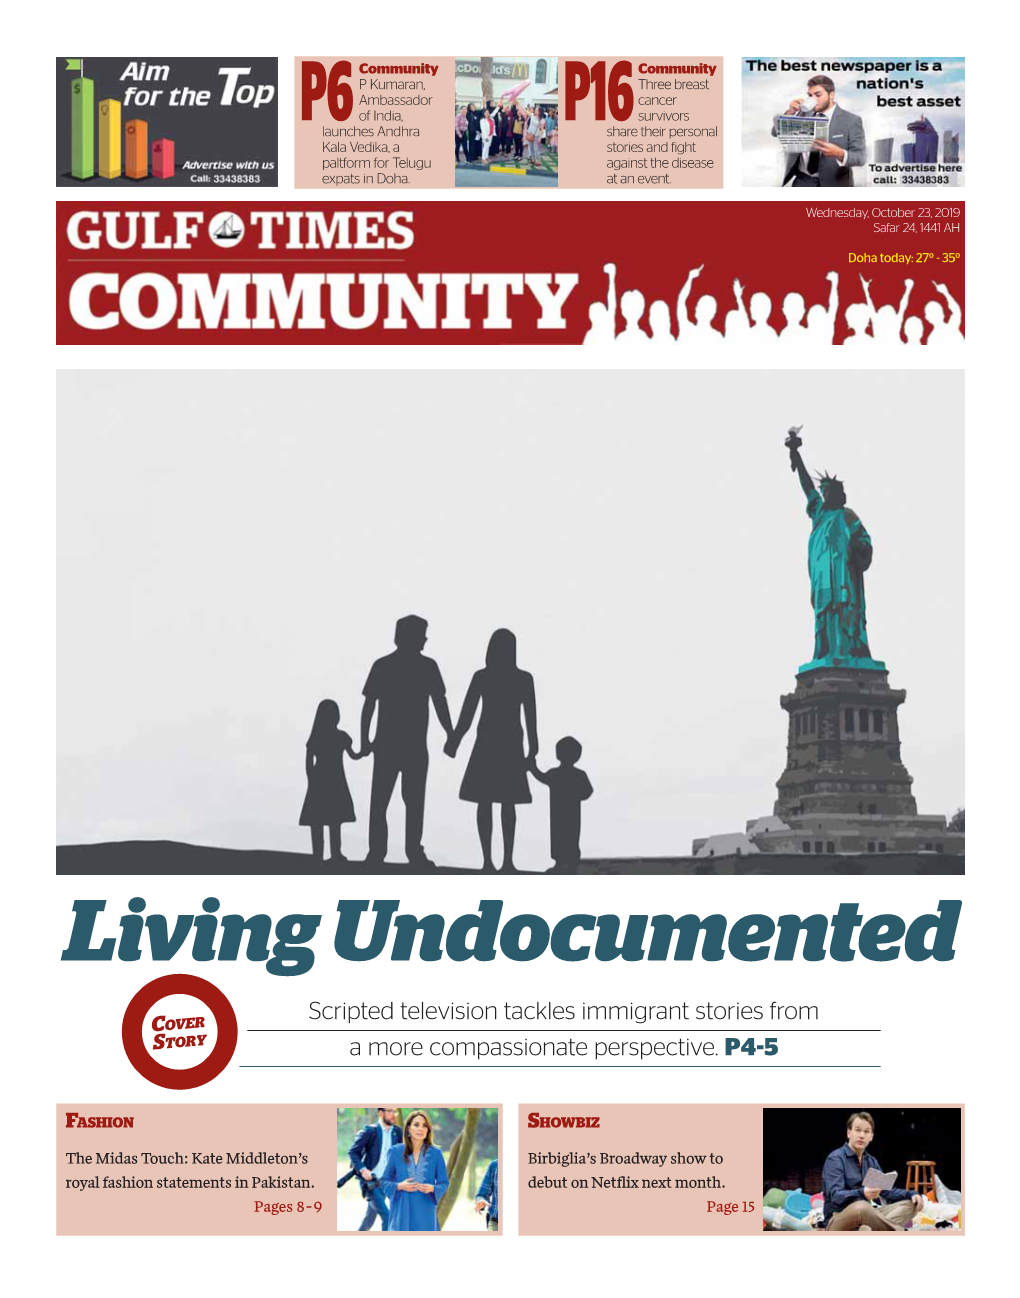 Living Undocumented Scripted Television Tackles Immigrant Stories from COVER STORY a More Compassionate Perspective